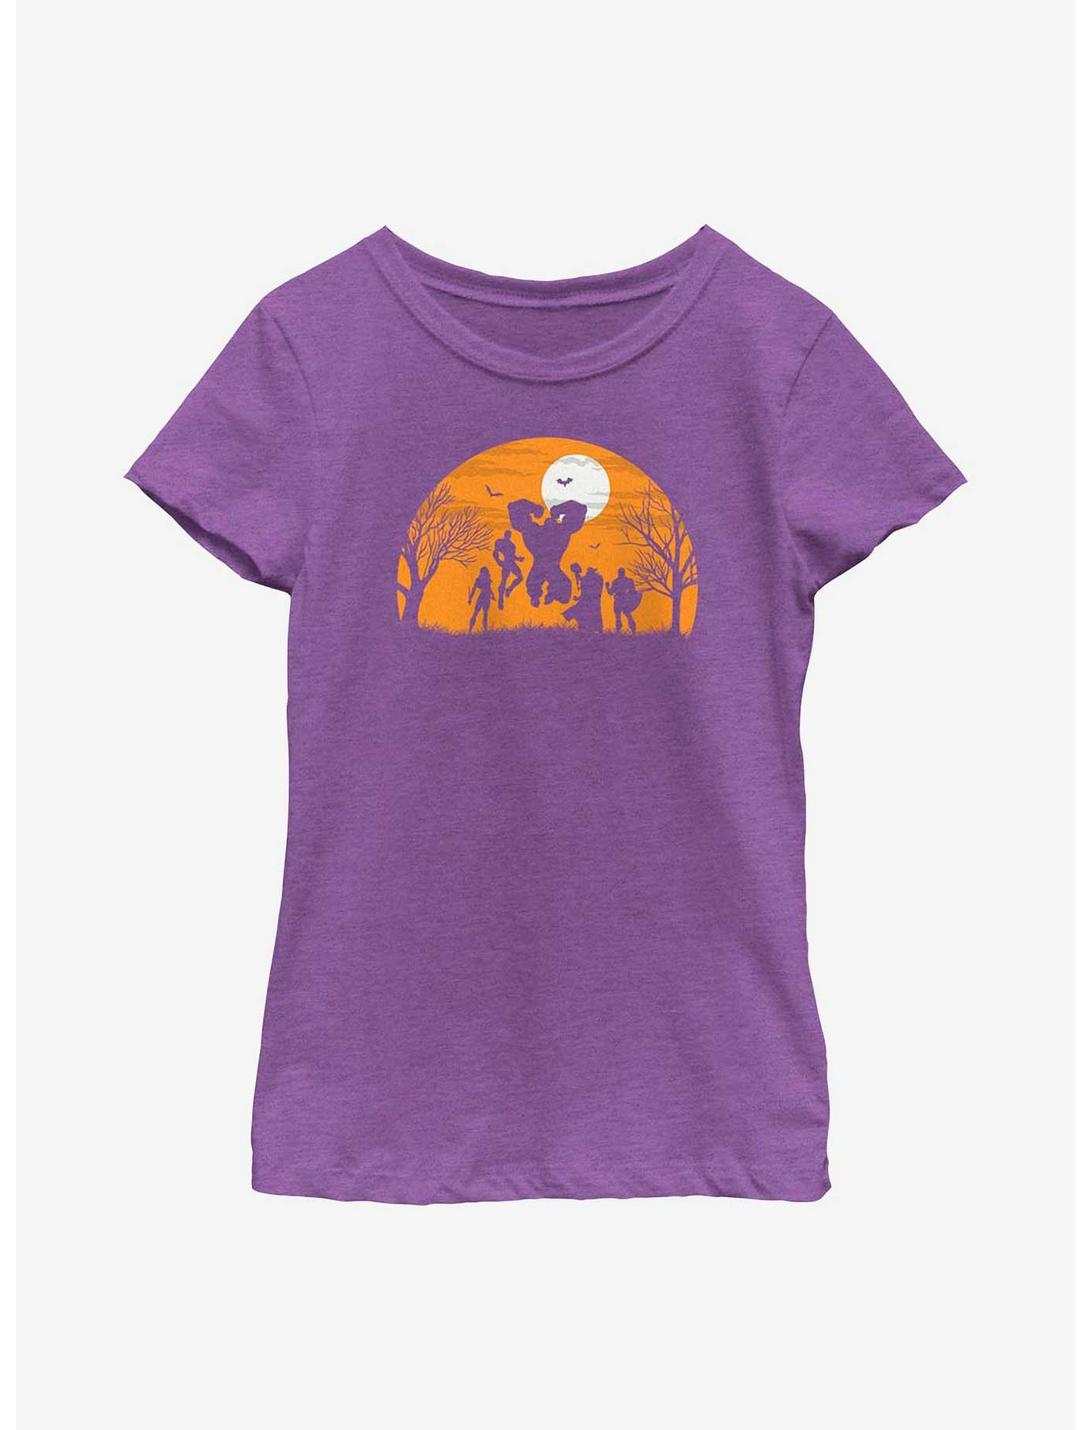 Marvel Avengers The Haunted Heroes Youth Girls T-Shirt, PURPLE BERRY, hi-res